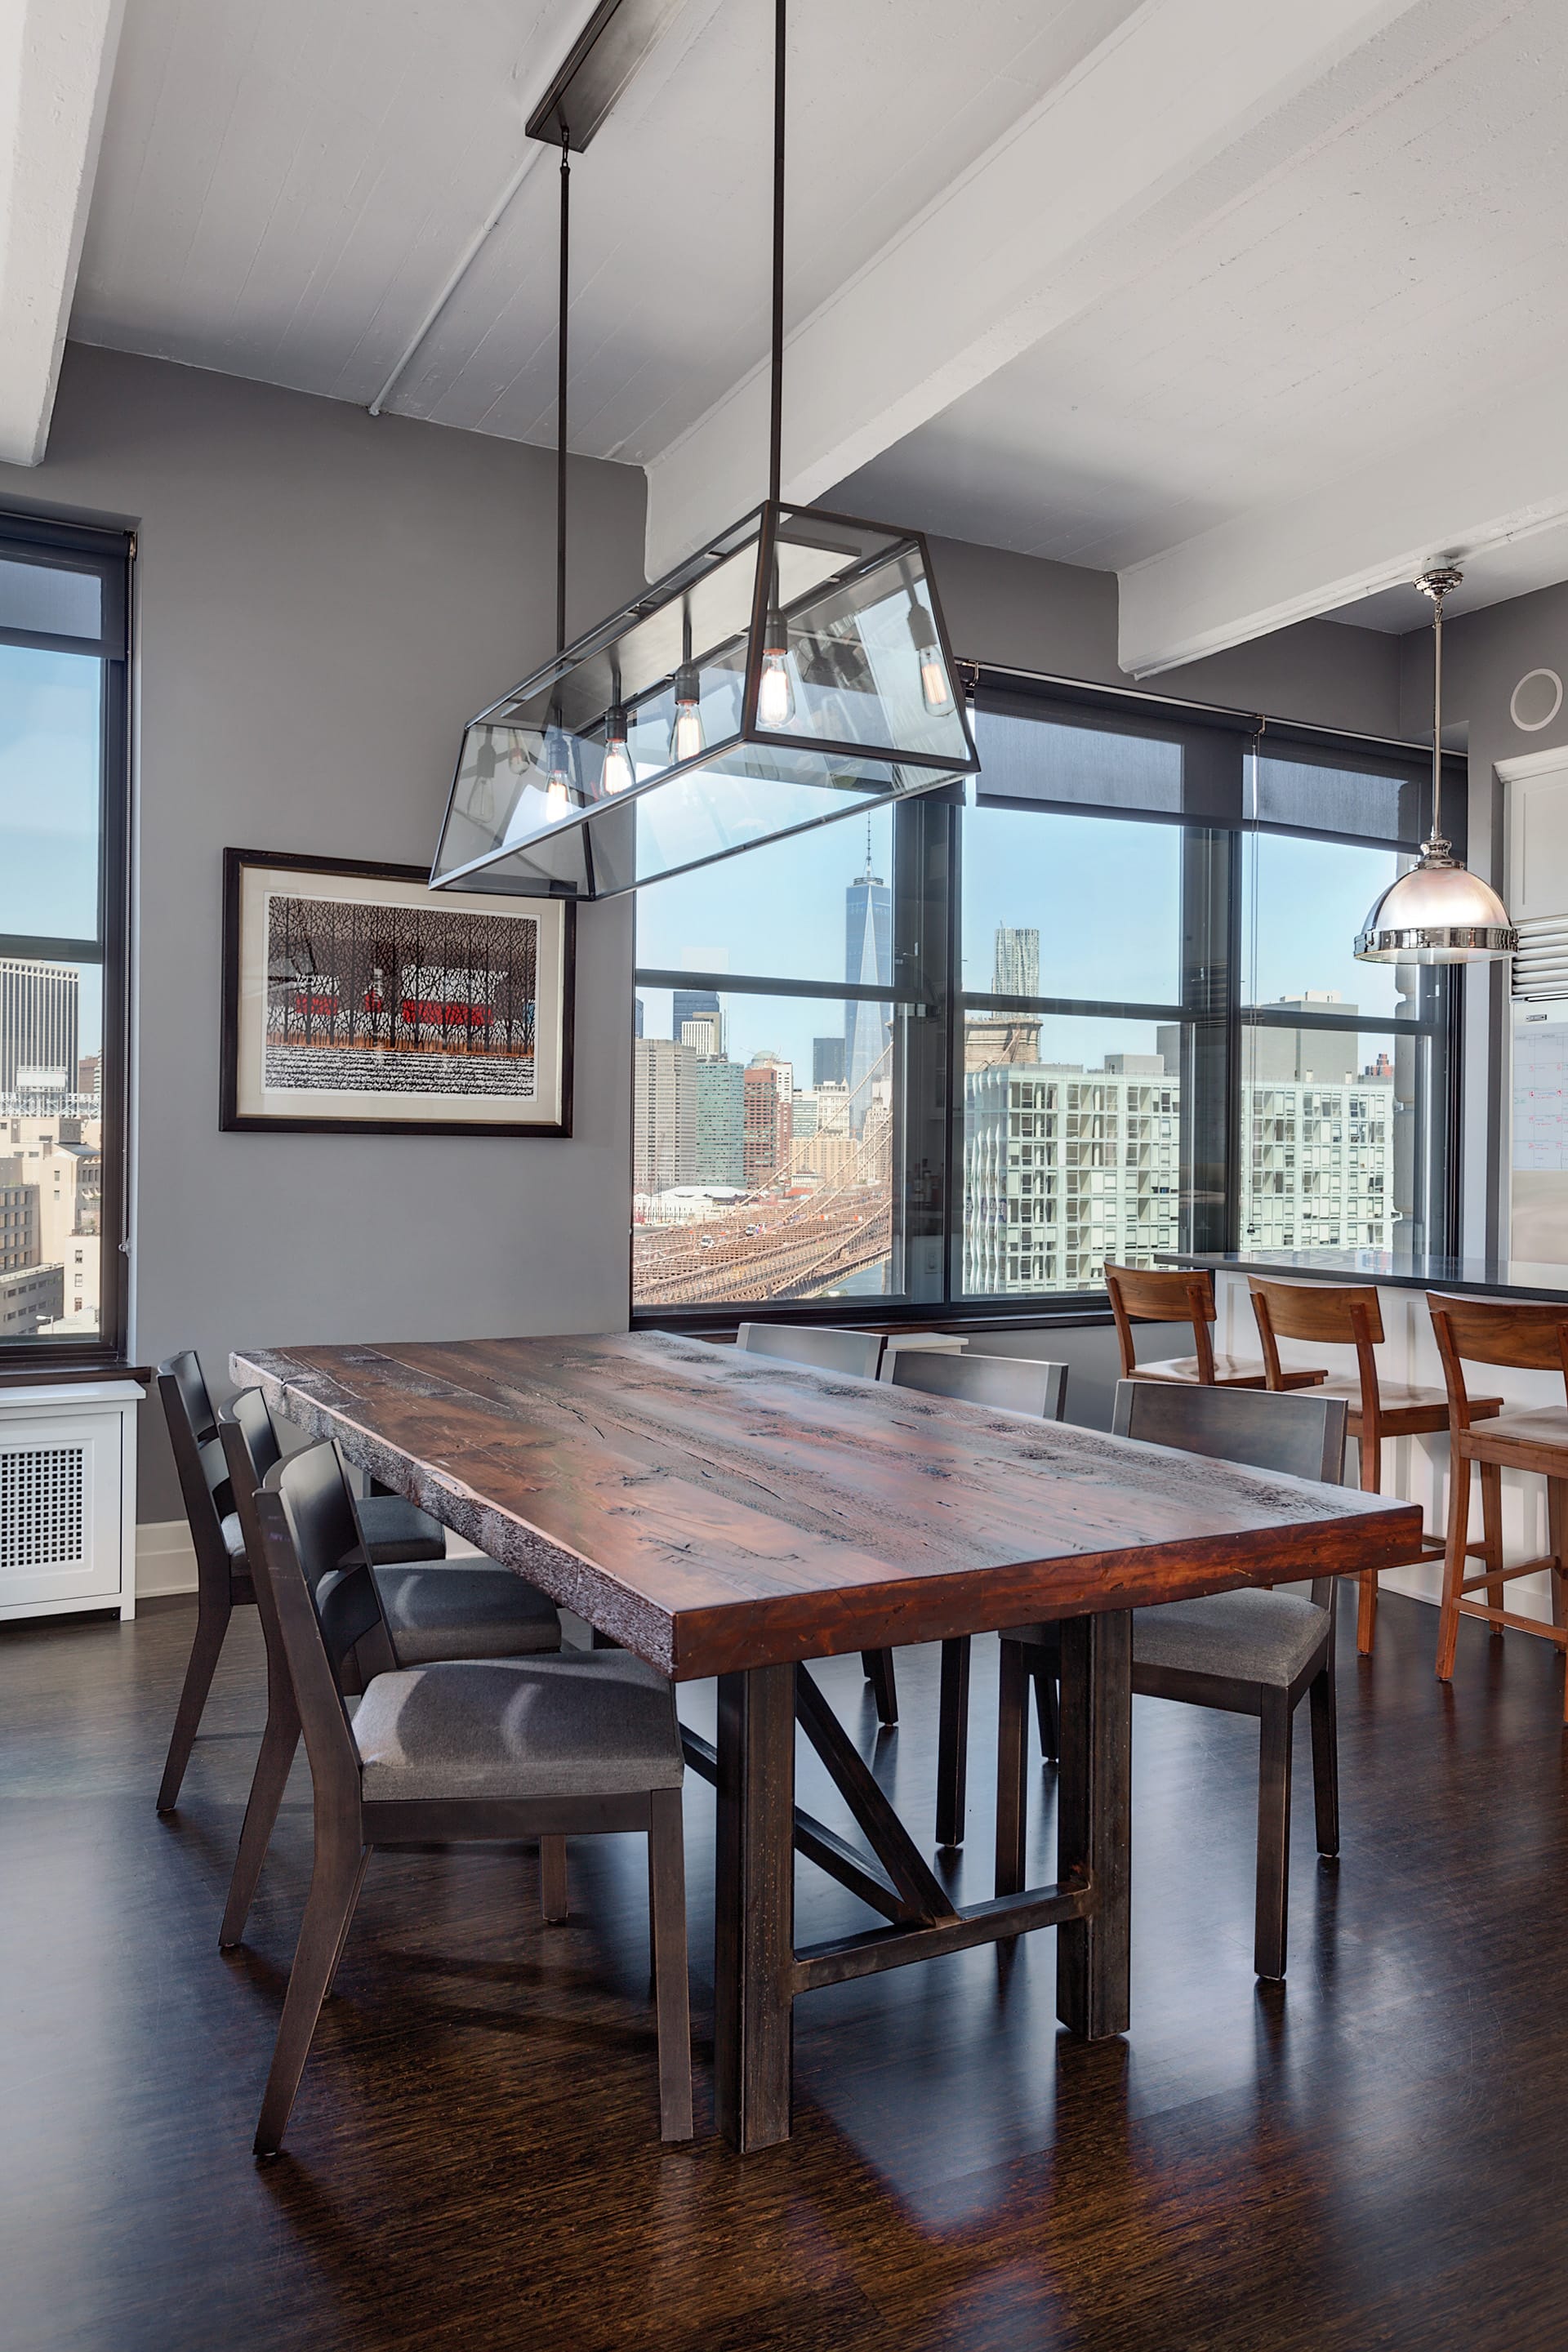 Dining area in a DUMBO loft with a wood dining table and decorative light fixture